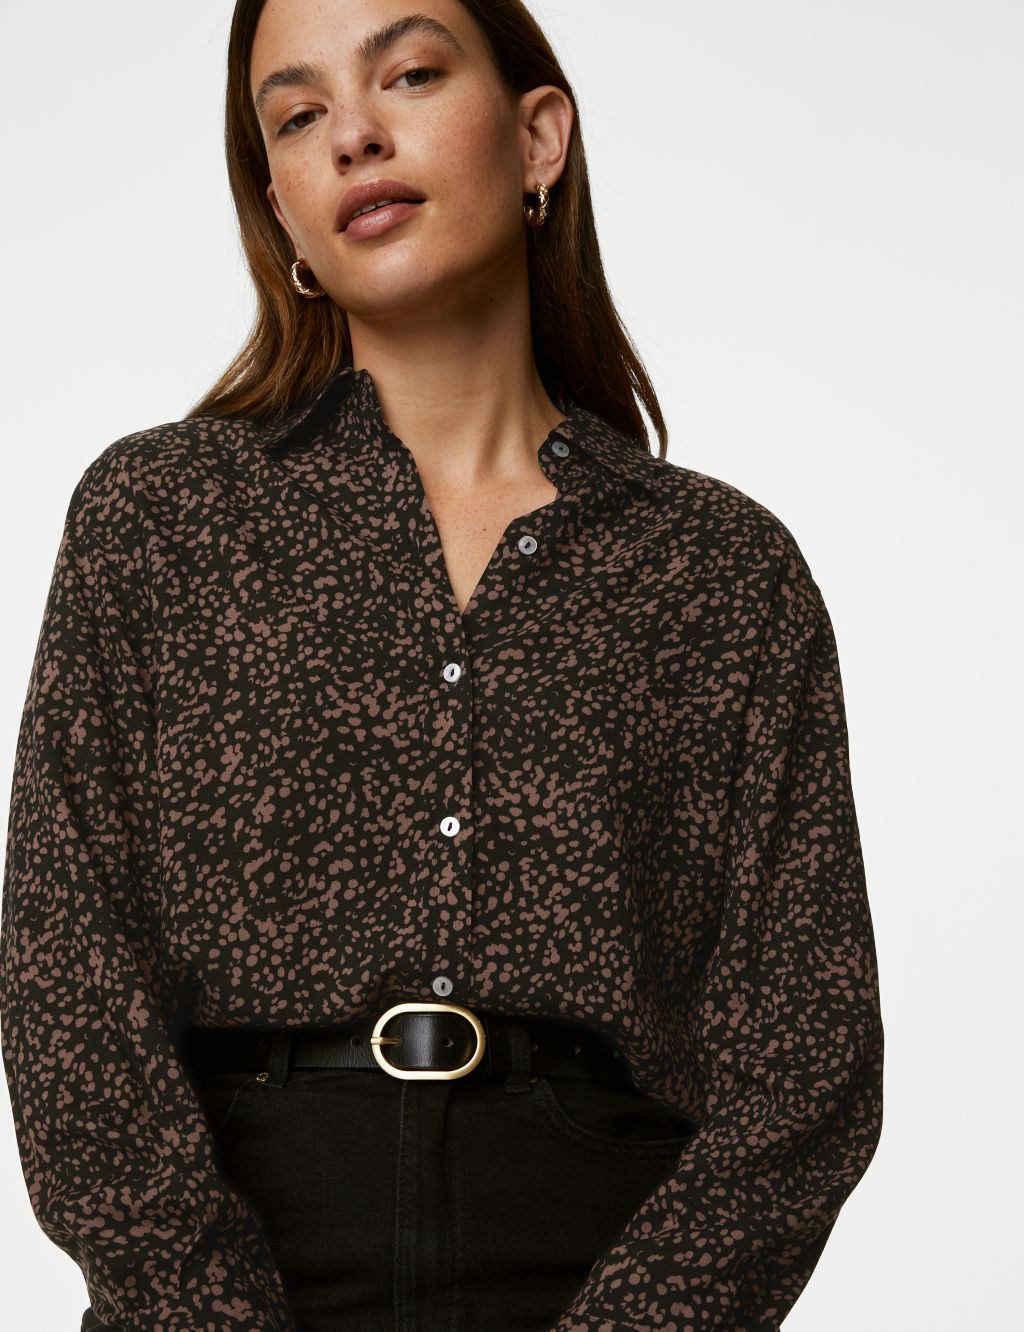 Printed Collared Relaxed Shirt image 1